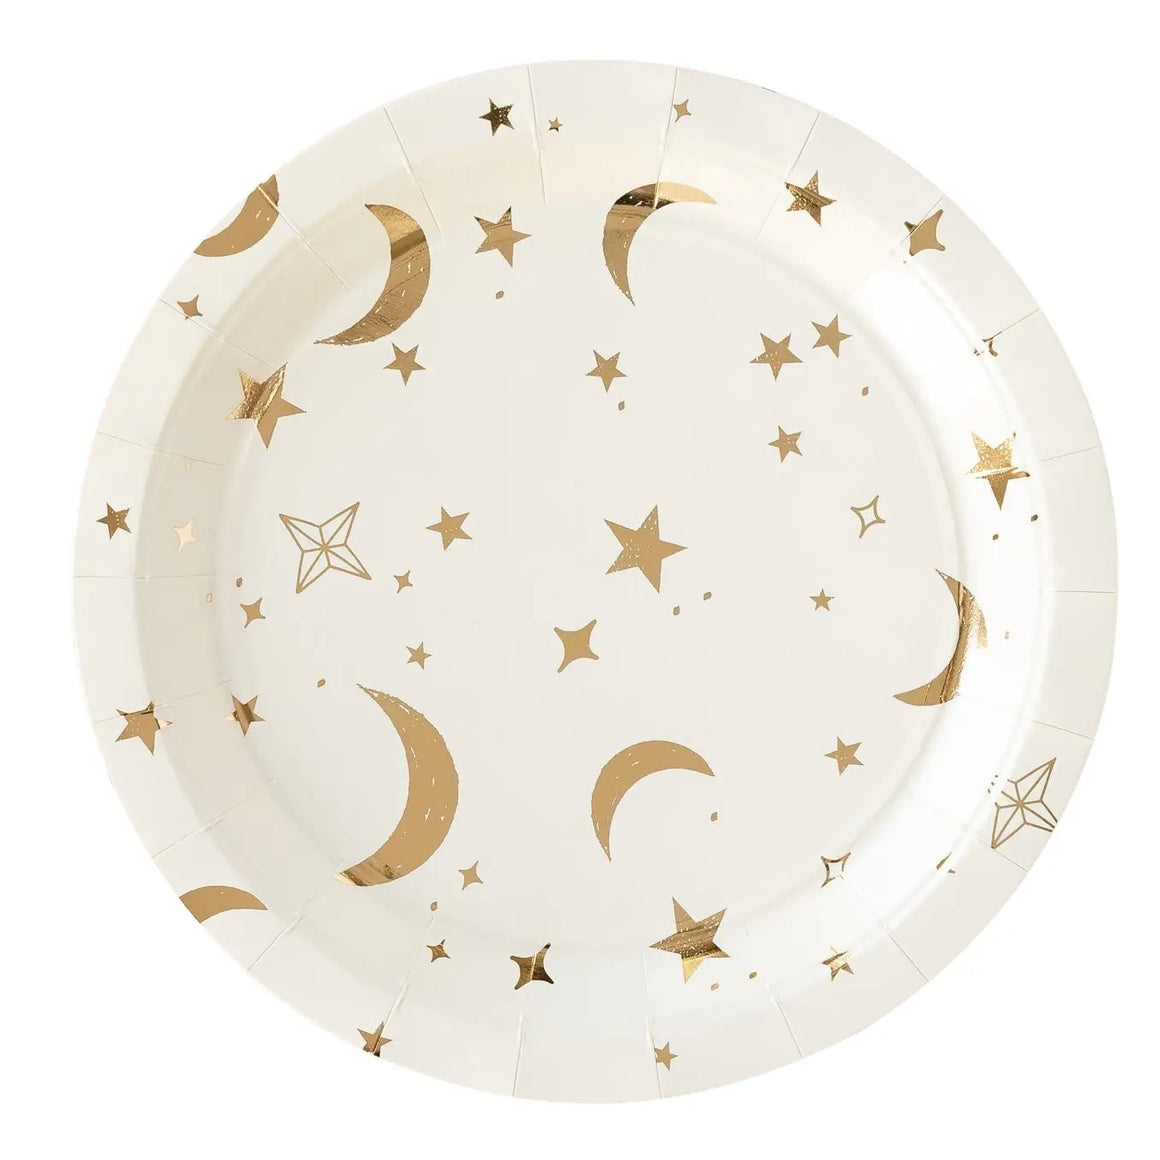 PLATES LARGE - SPACE CELESTIAL